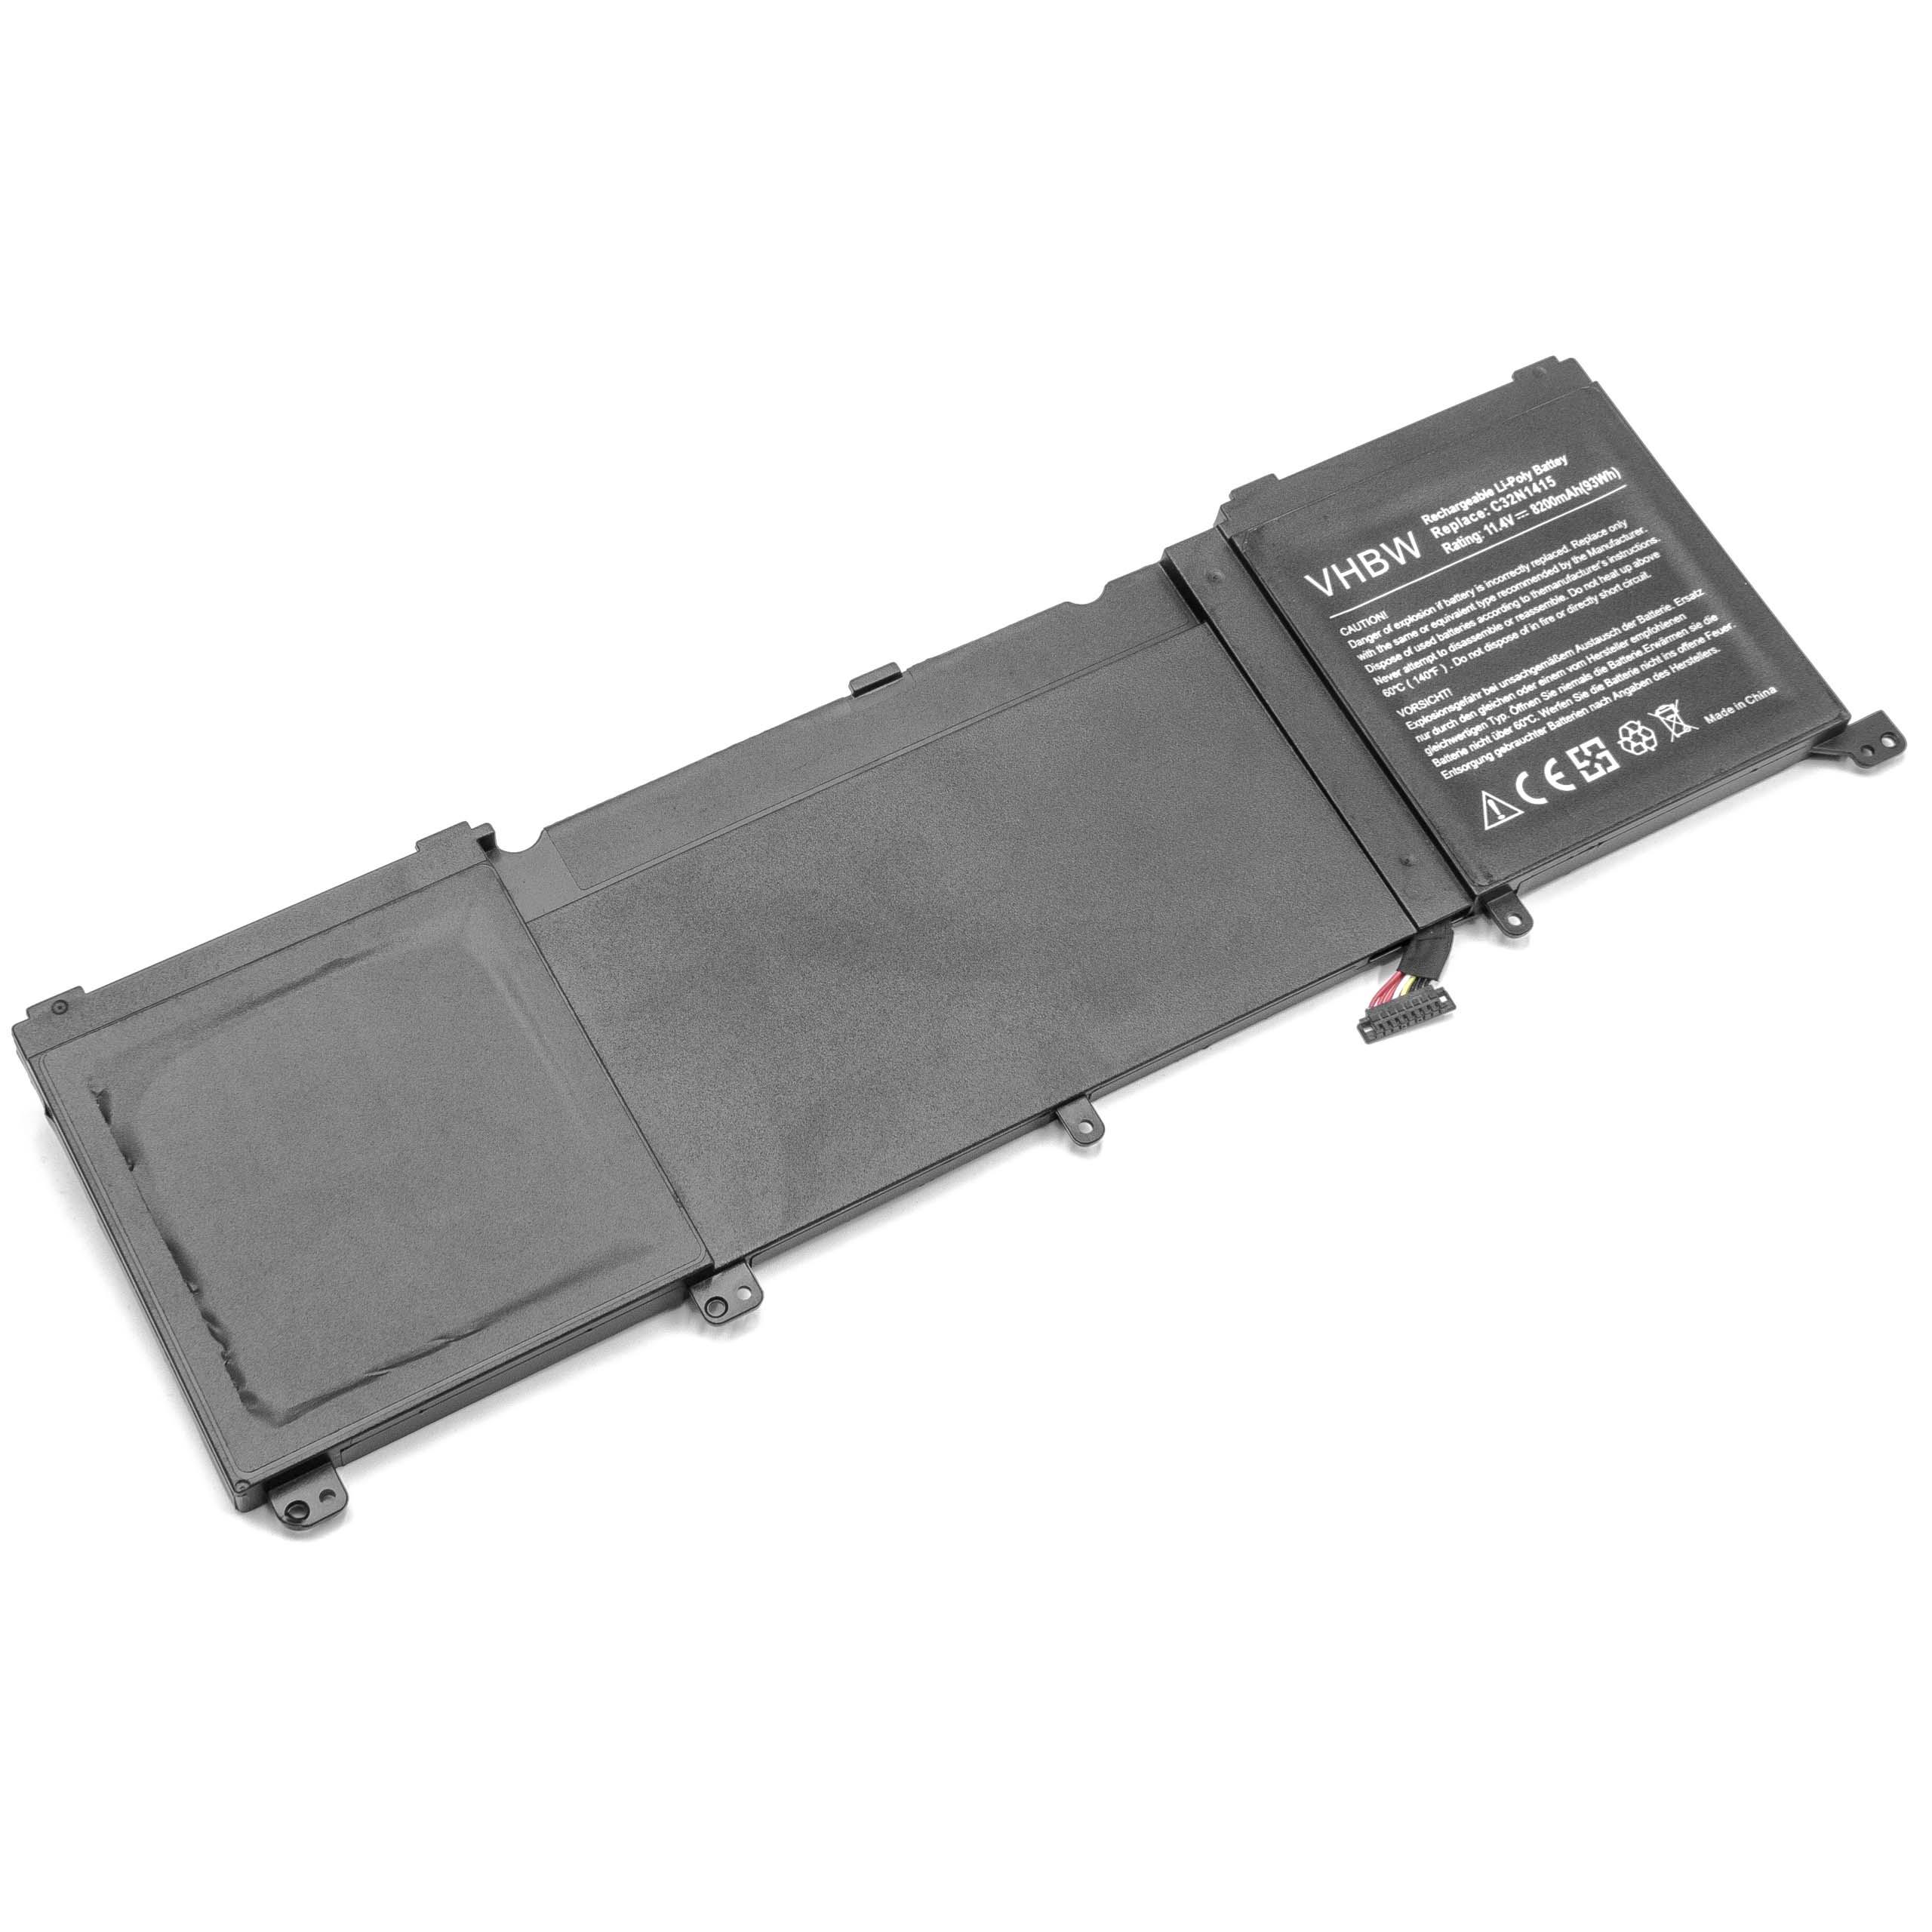 Notebook Battery Replacement for Asus C32N1415, 0B200-01250000 - 8200mAh 11.4V Li-polymer